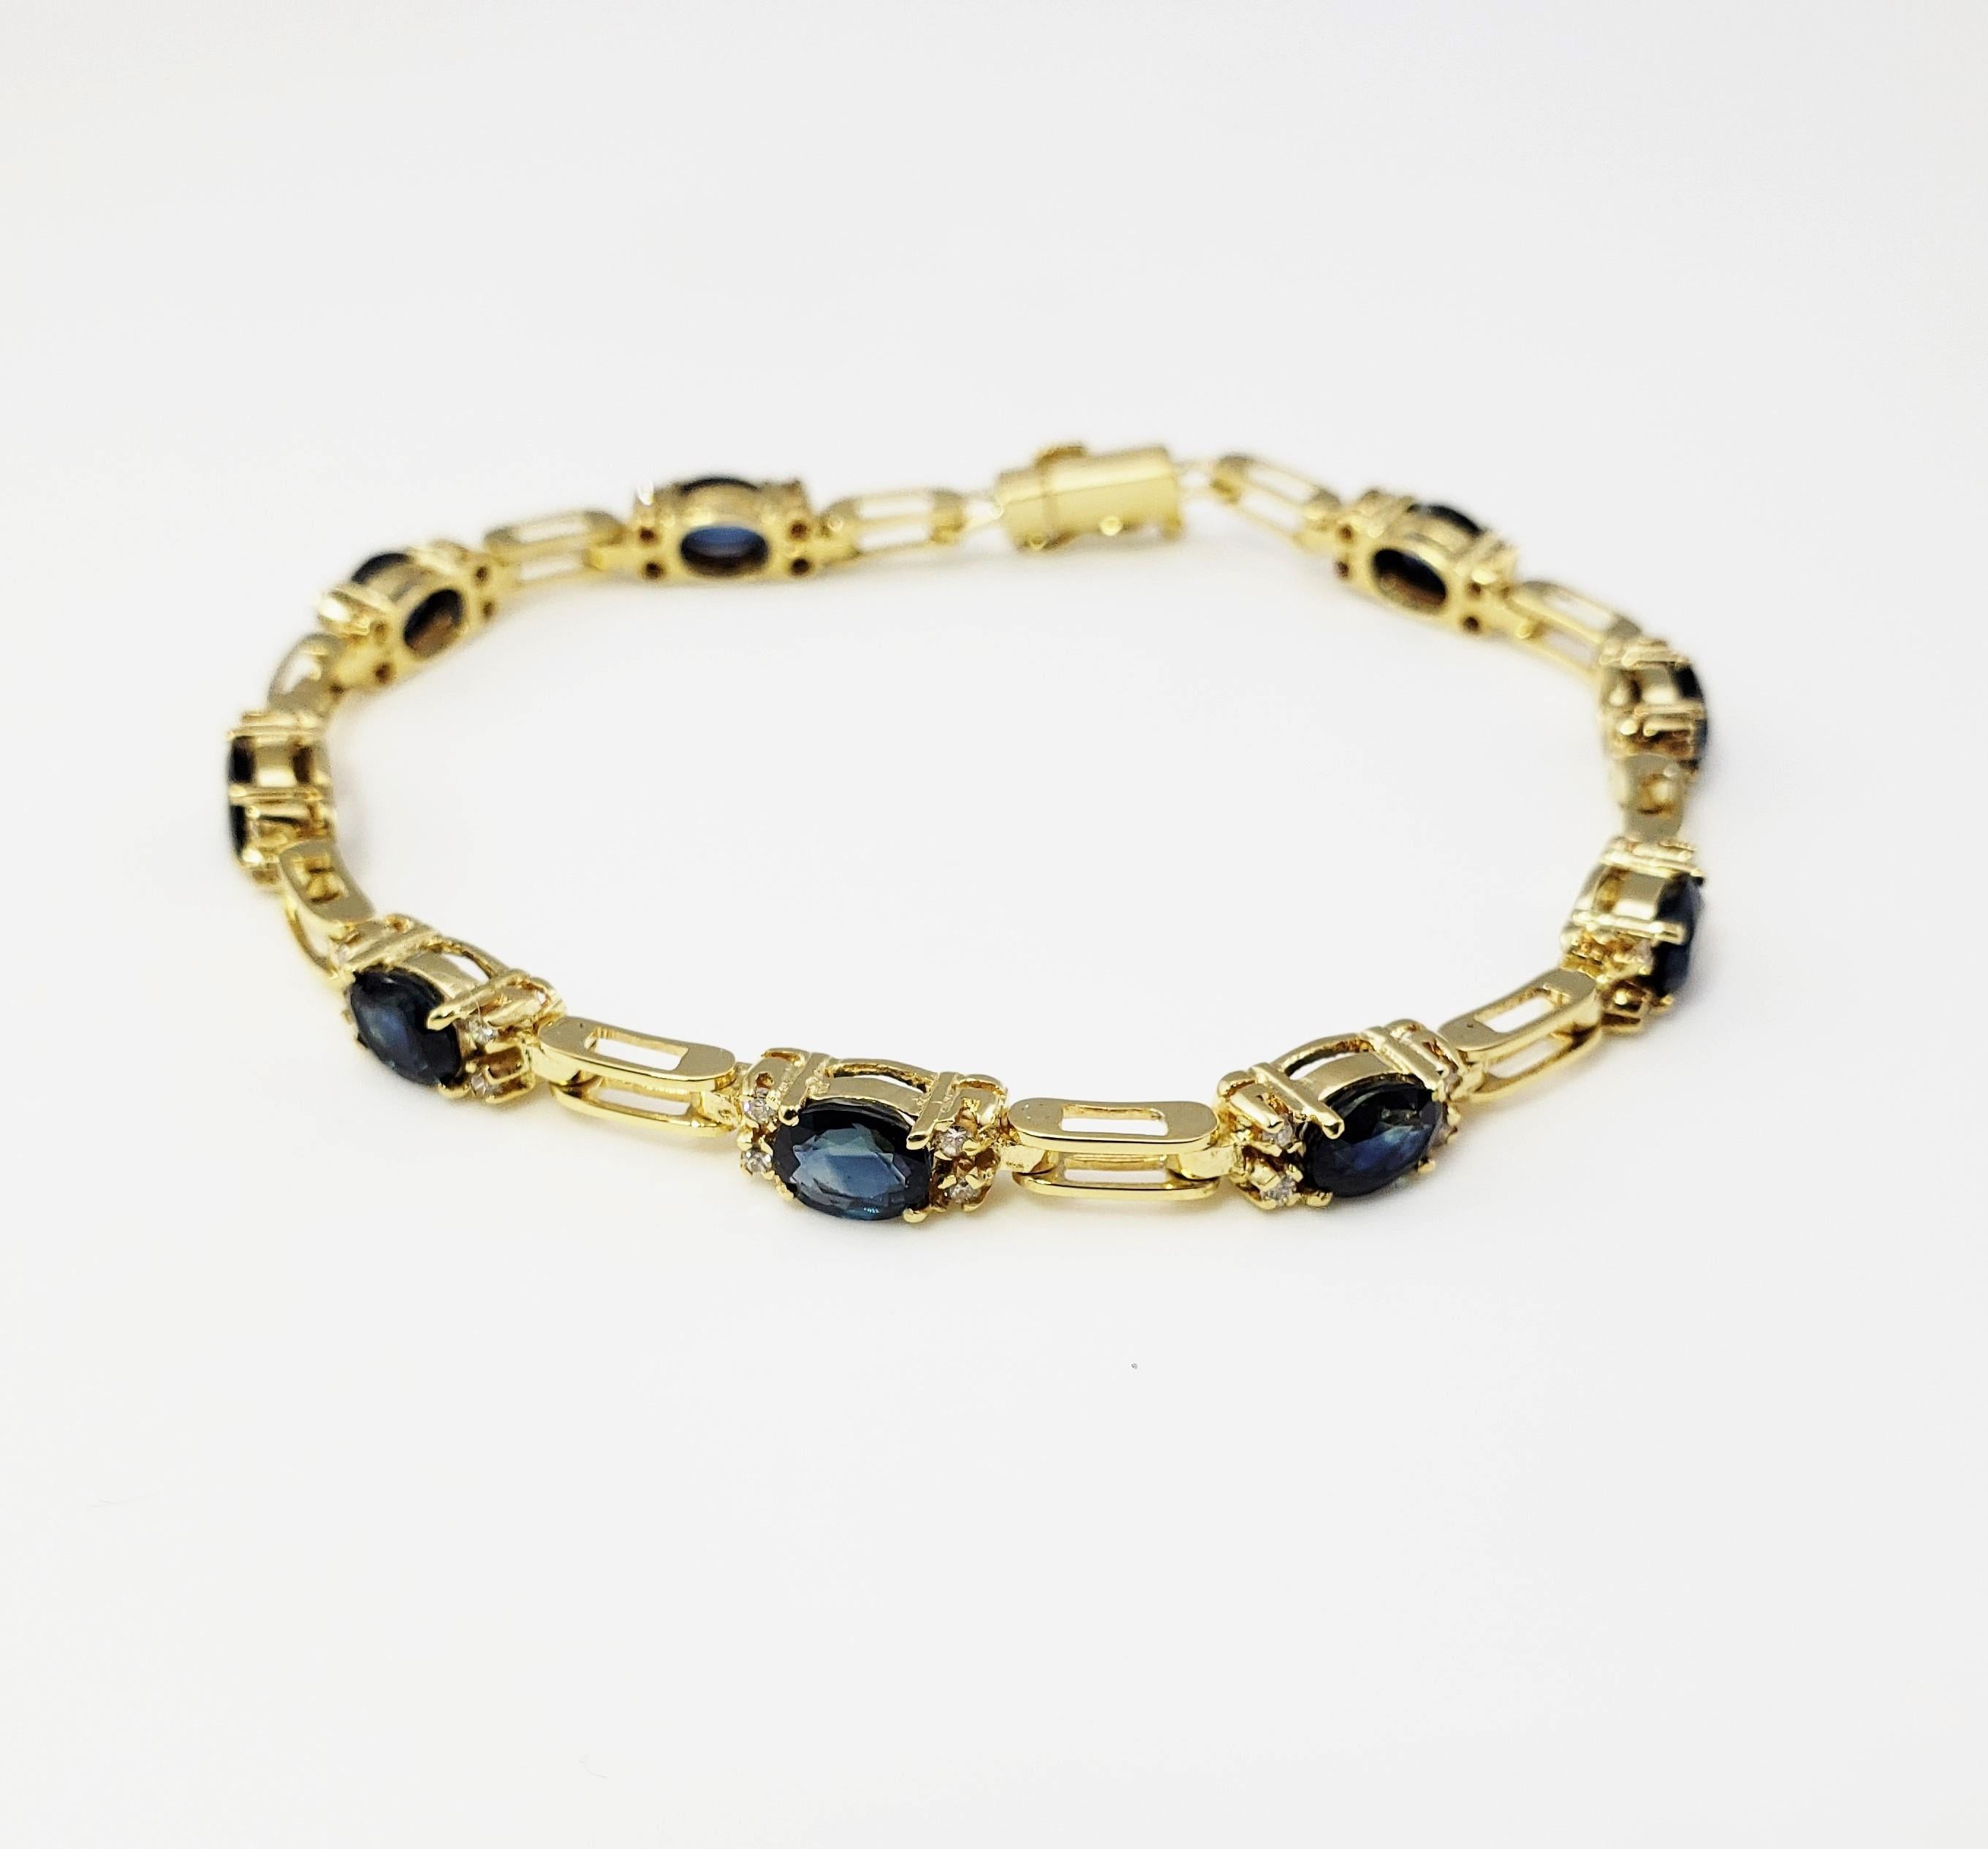 Vintage 18 Karat Yellow Gold Sapphire and Diamond Bracelet-

This stunning bracelet features nine oval sapphires (6 mm x 4 mm) and 36 round brilliant cut diamonds* set in beautifully detailed 18K yellow gold. Safety closure.

* One diamond has chip